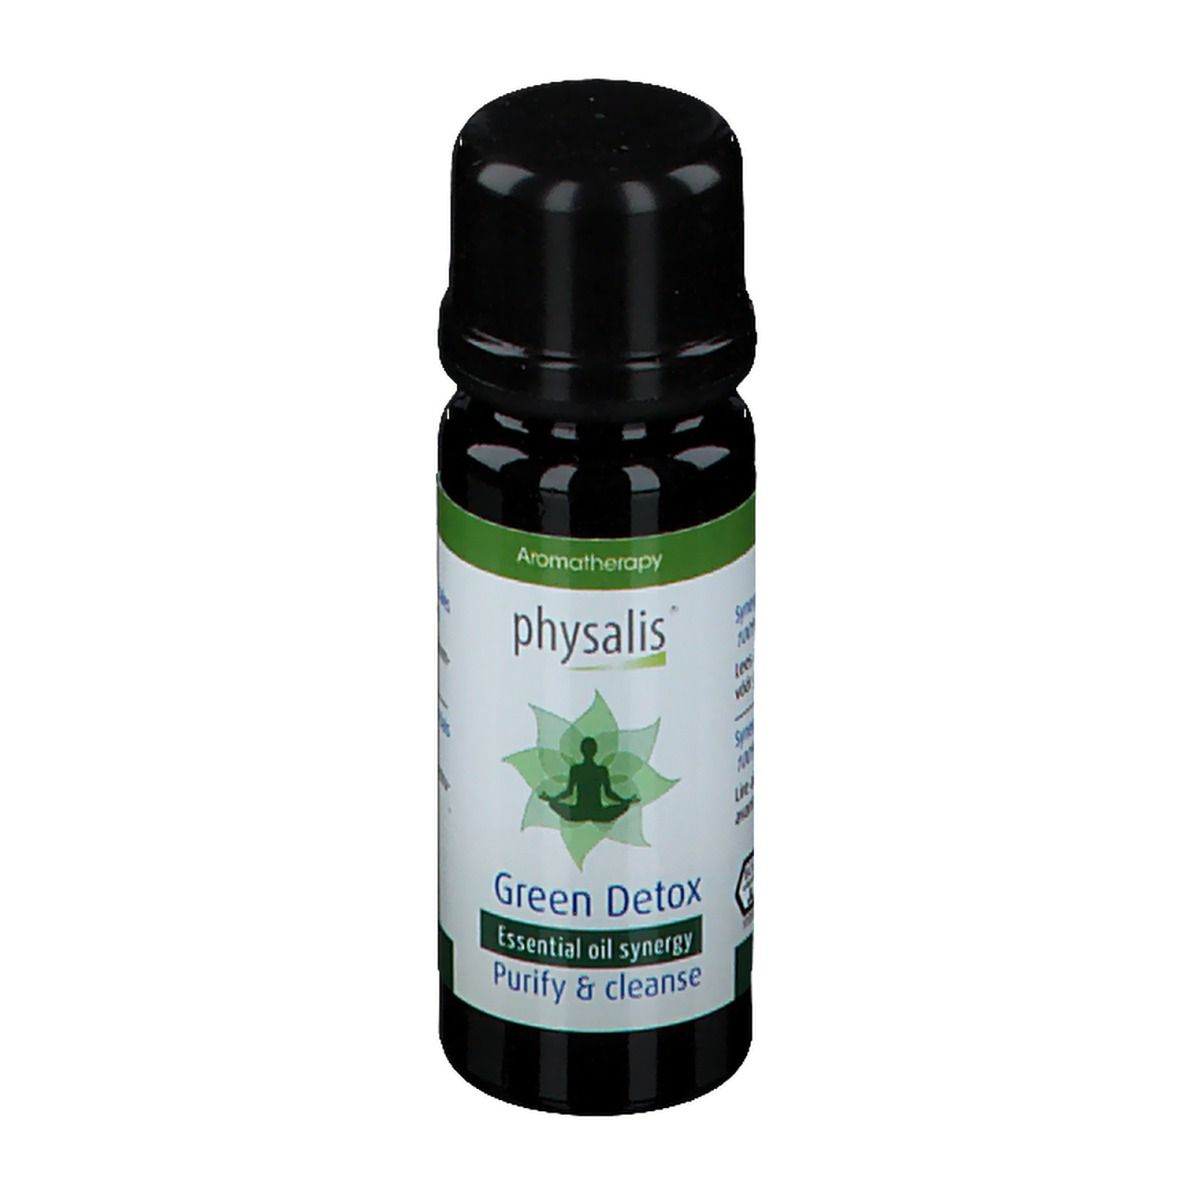 physalis® Synergie Green Detox Purify & cleanse Huile essentielle Bio